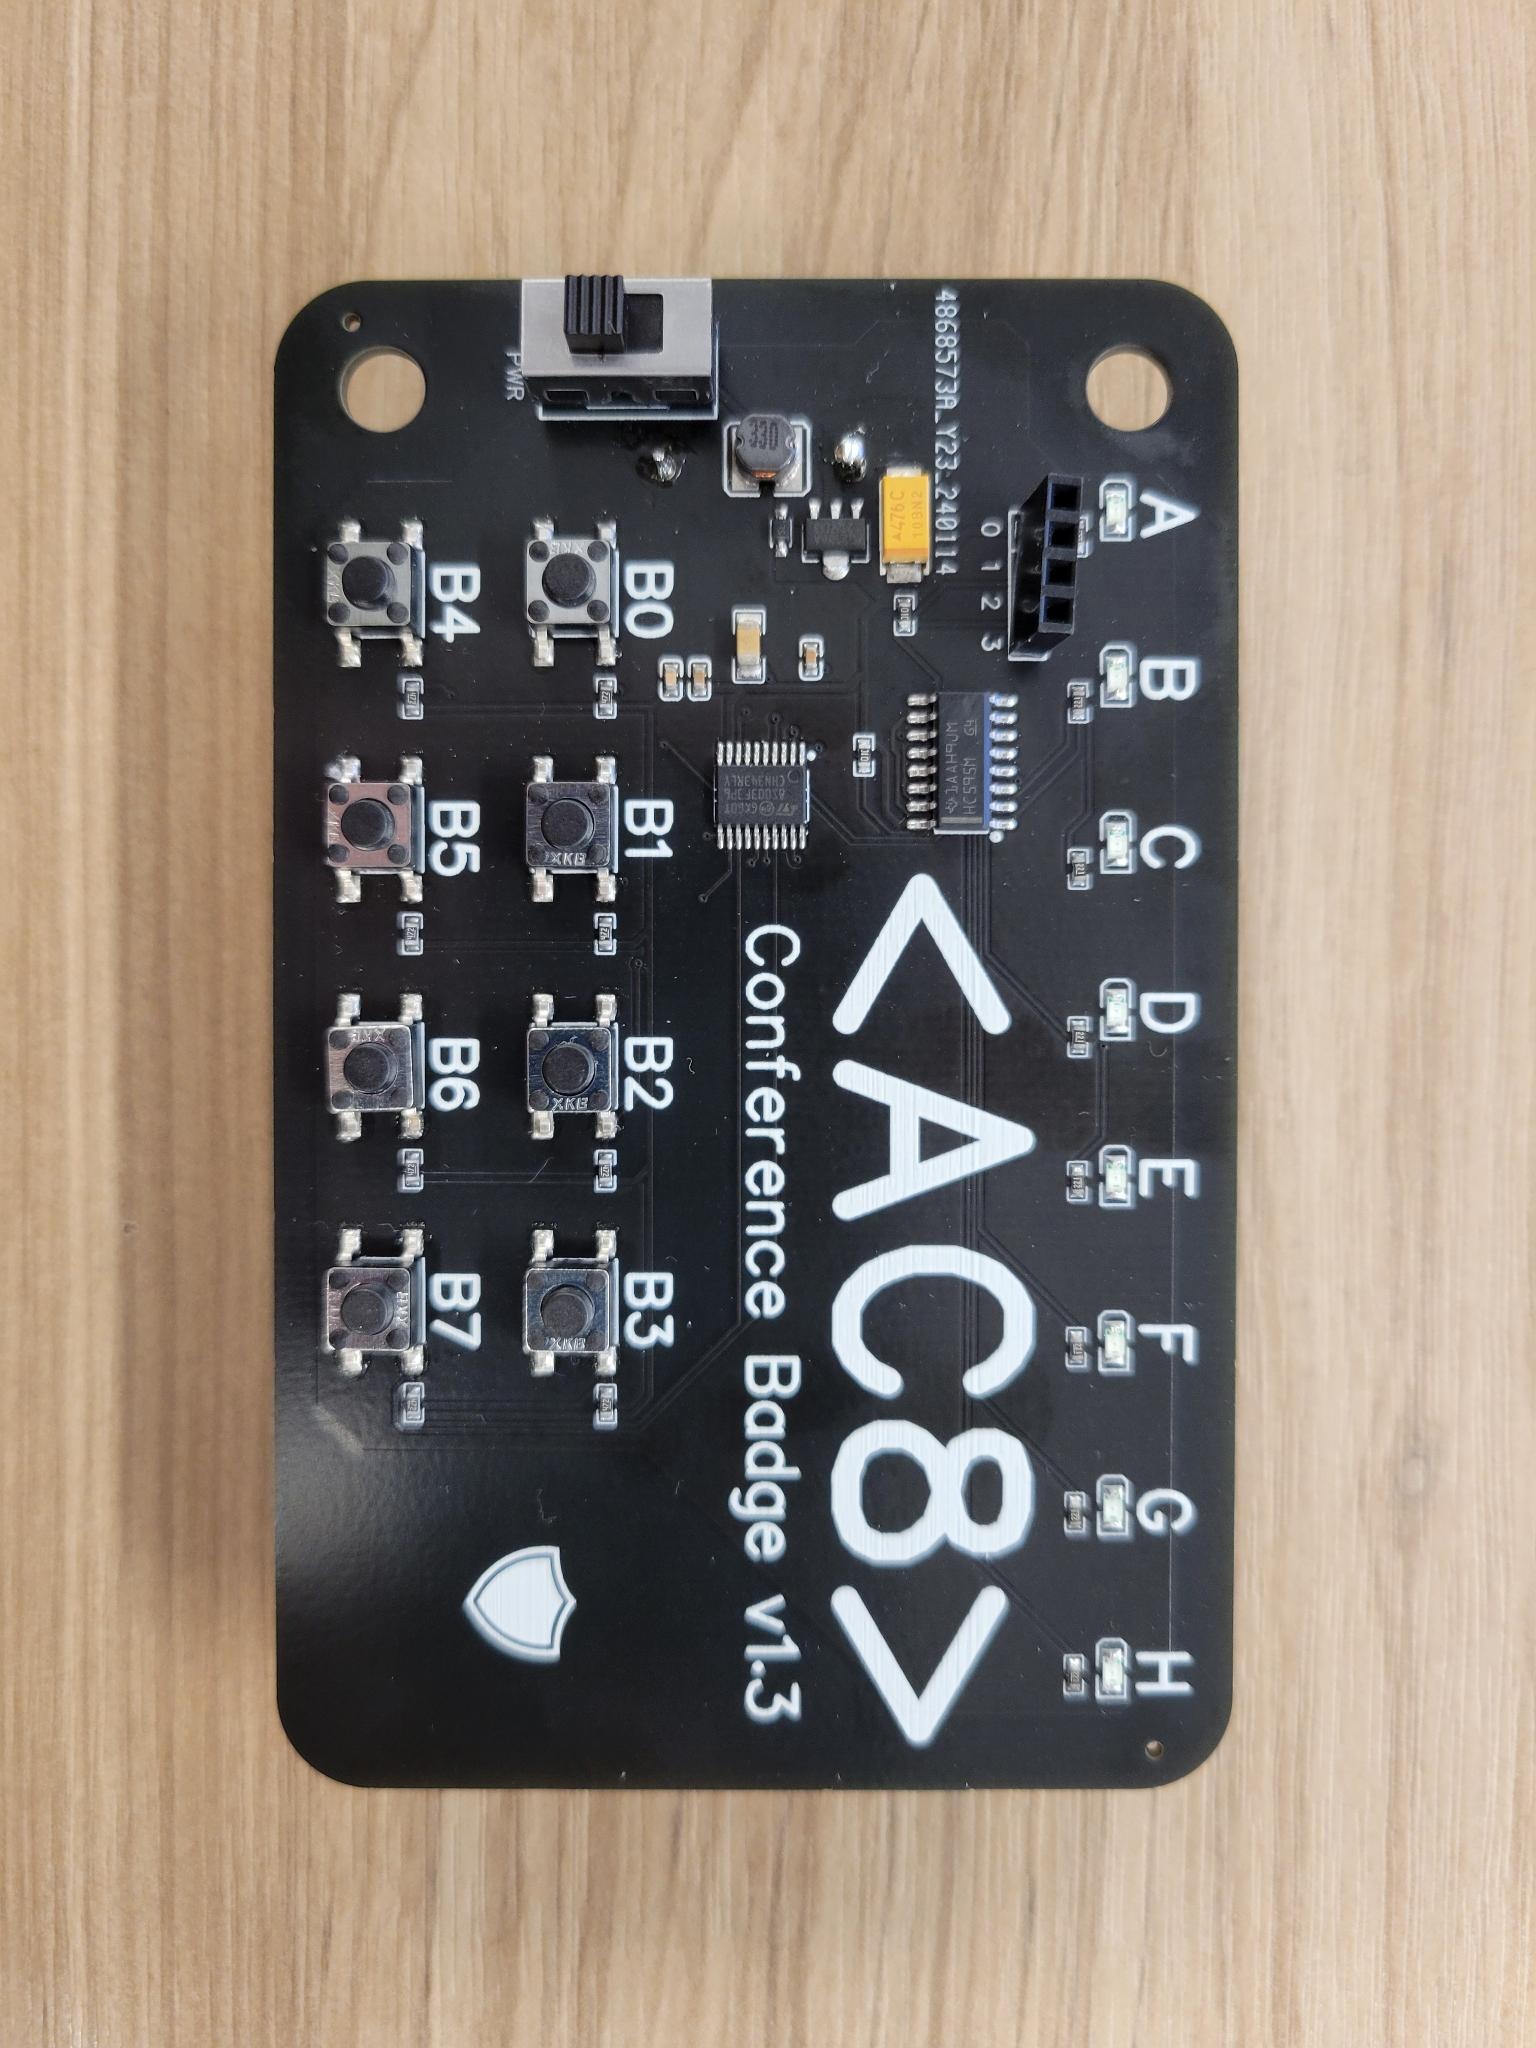 A close-up of the badge: A black PCB labelled AC8 / Conference Badge v1.3